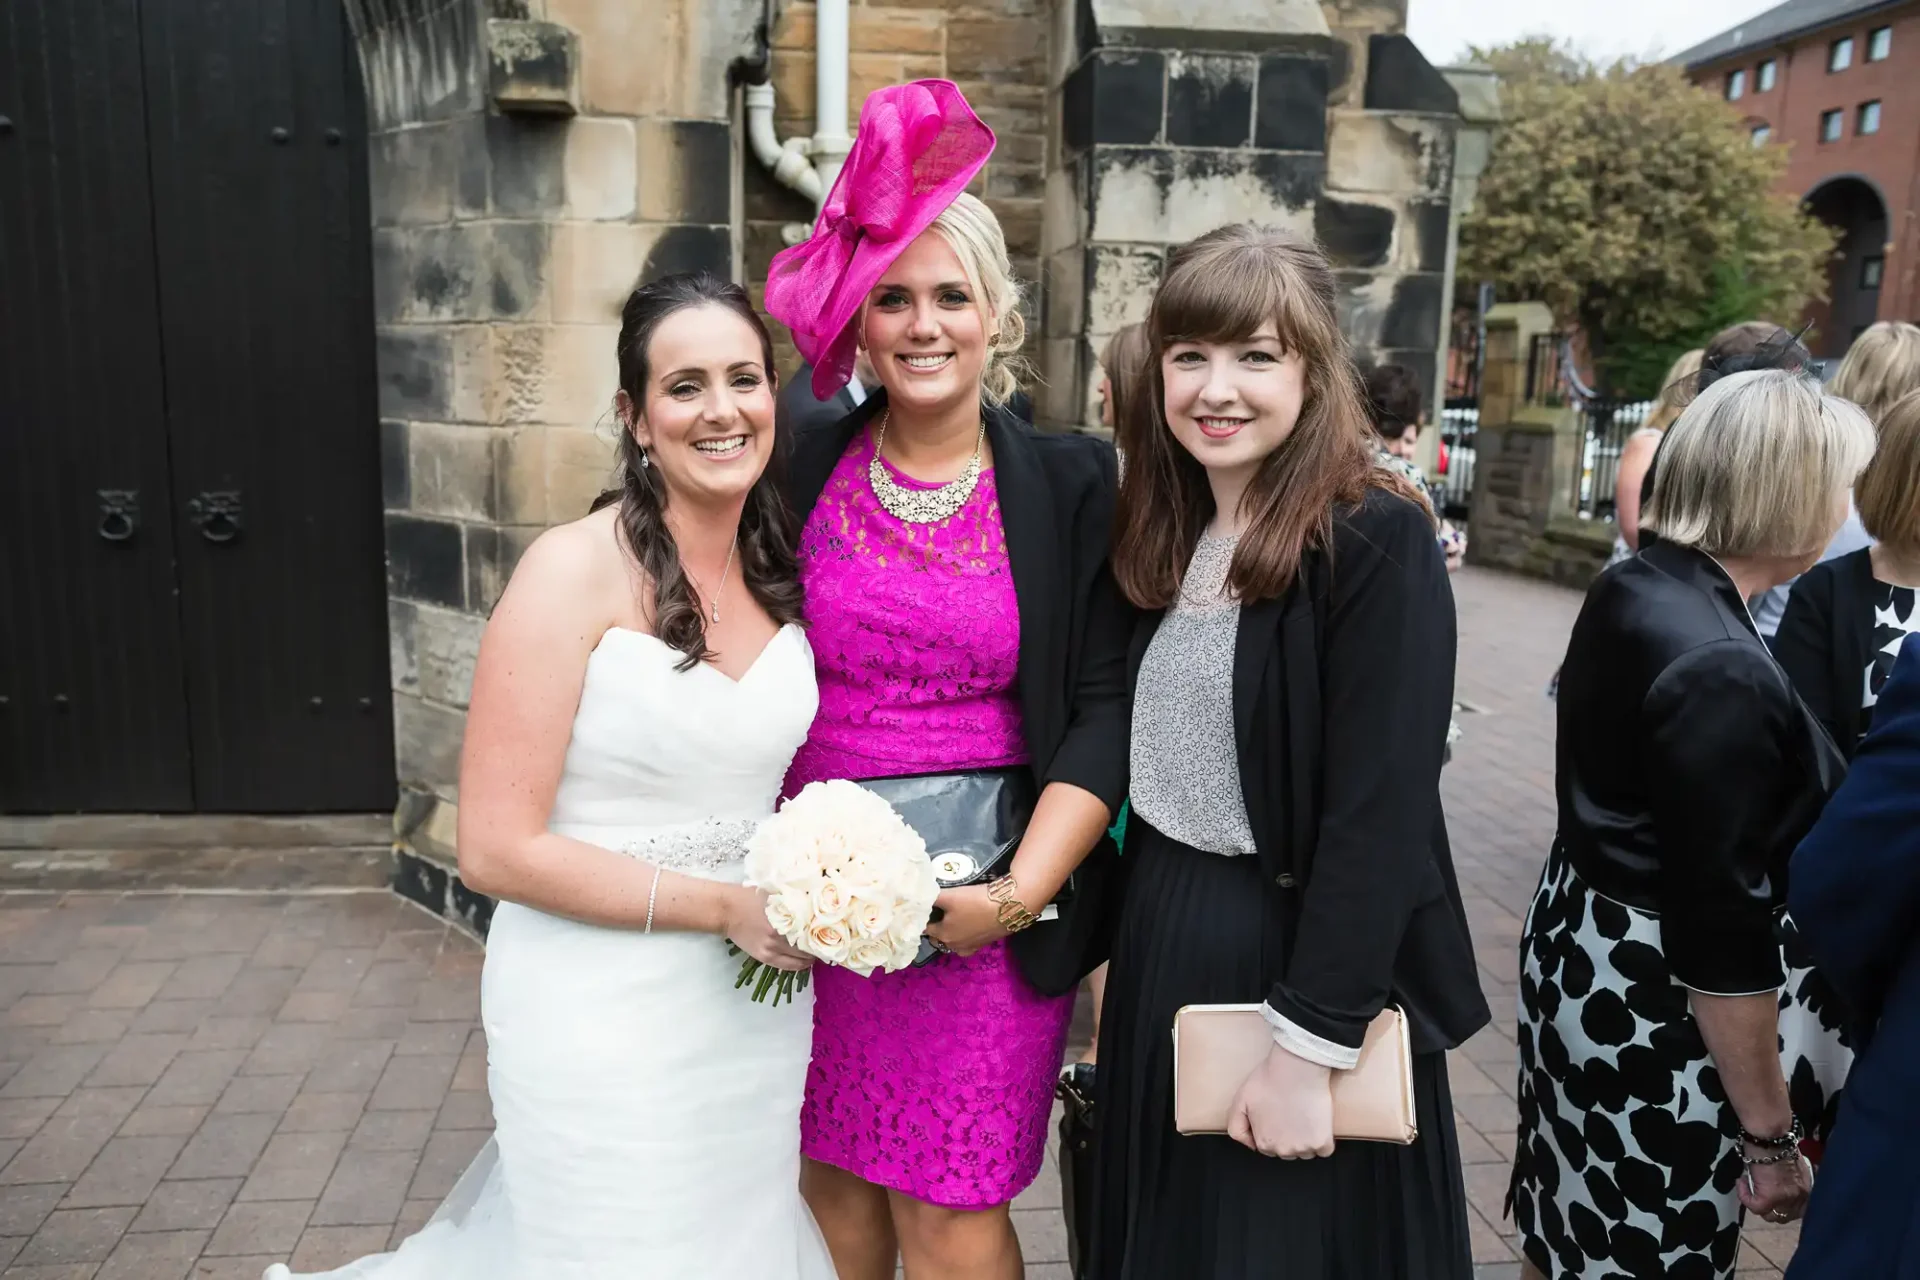 Bride in white dress with two women, one in a pink dress and large hat, and the other in a black cardigan, all smiling outdoors.